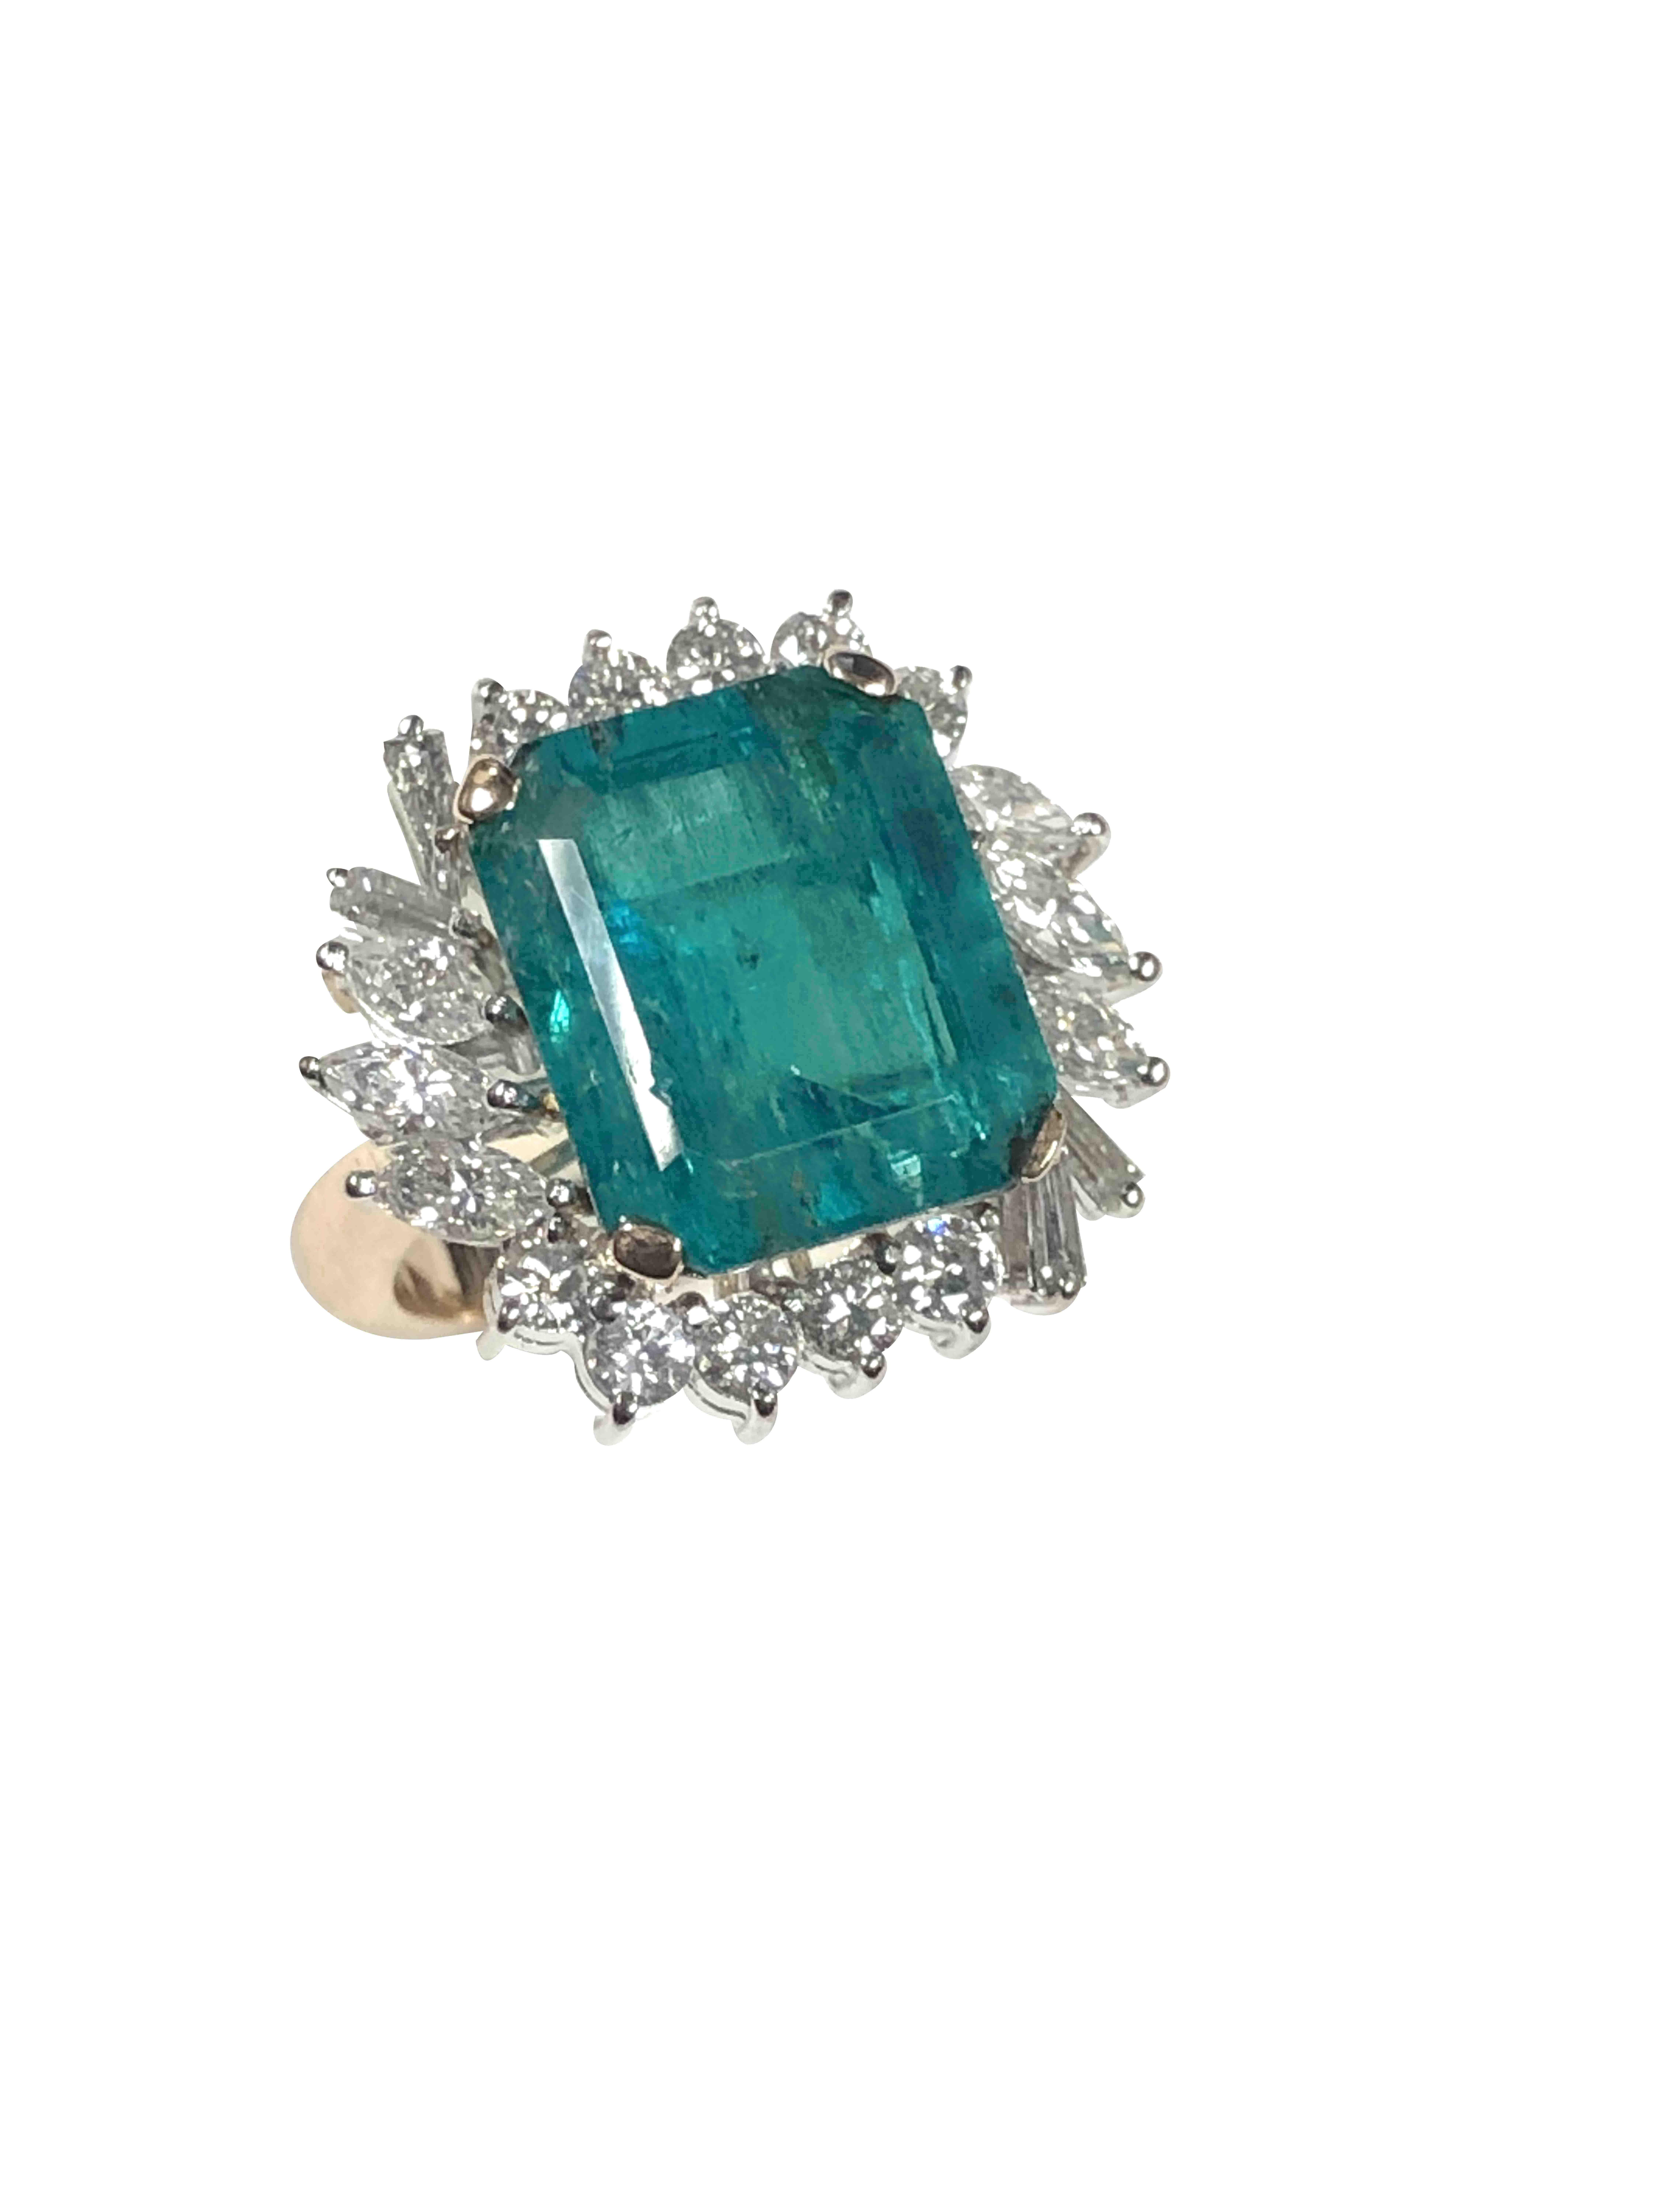 Circa 1990 Fine Columbian Emerald Ring, the Step cut Emerald measures 13.75 X 11 X 7.95 M.M totaling 9 Carats, showing insignificant signs of any treatment. The 18K Yellow Gold and Platinum hand made mounting is set with Marquis, Round and Baguette